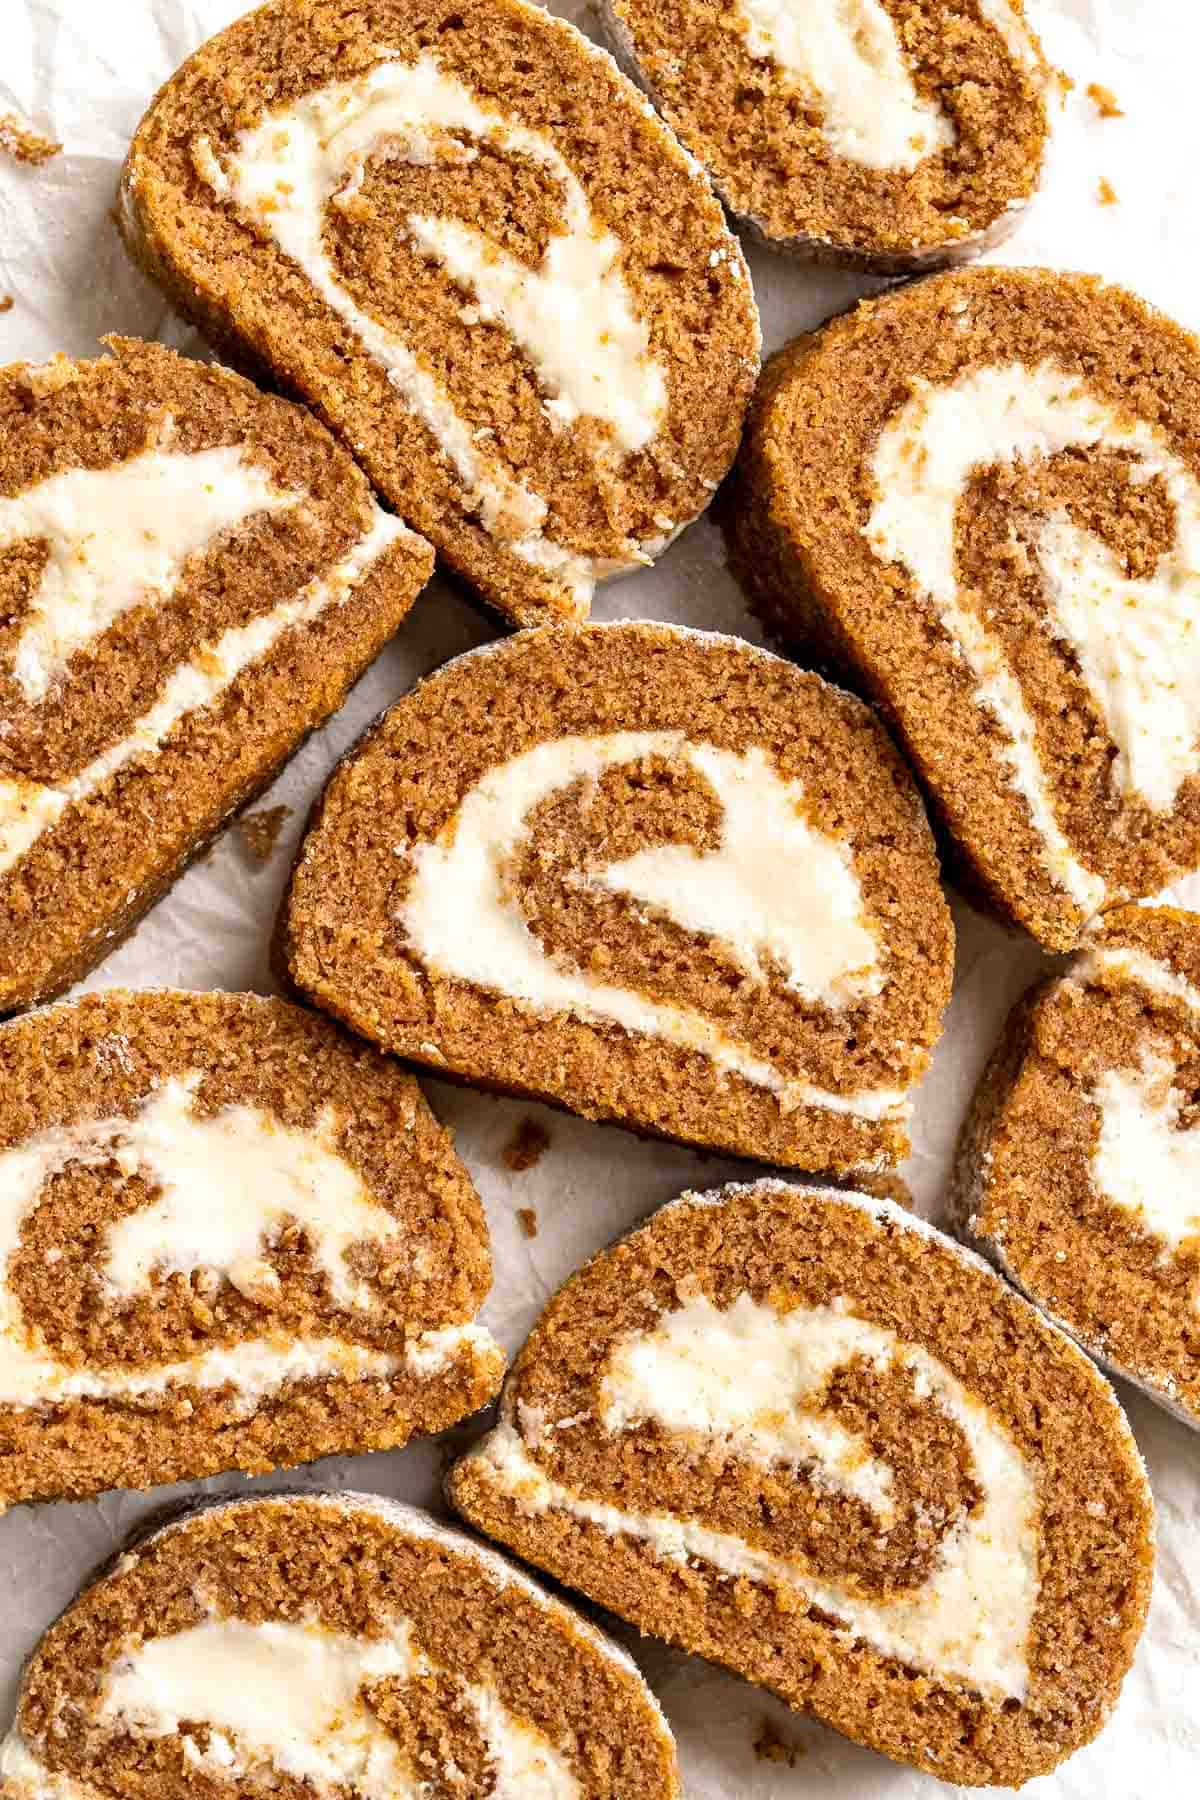 Celebrate the flavors of fall with a show-stopping Pumpkin Roll featuring a tender pumpkin spice cake swirled around a rich cream cheese filling. | aheadofthyme.com